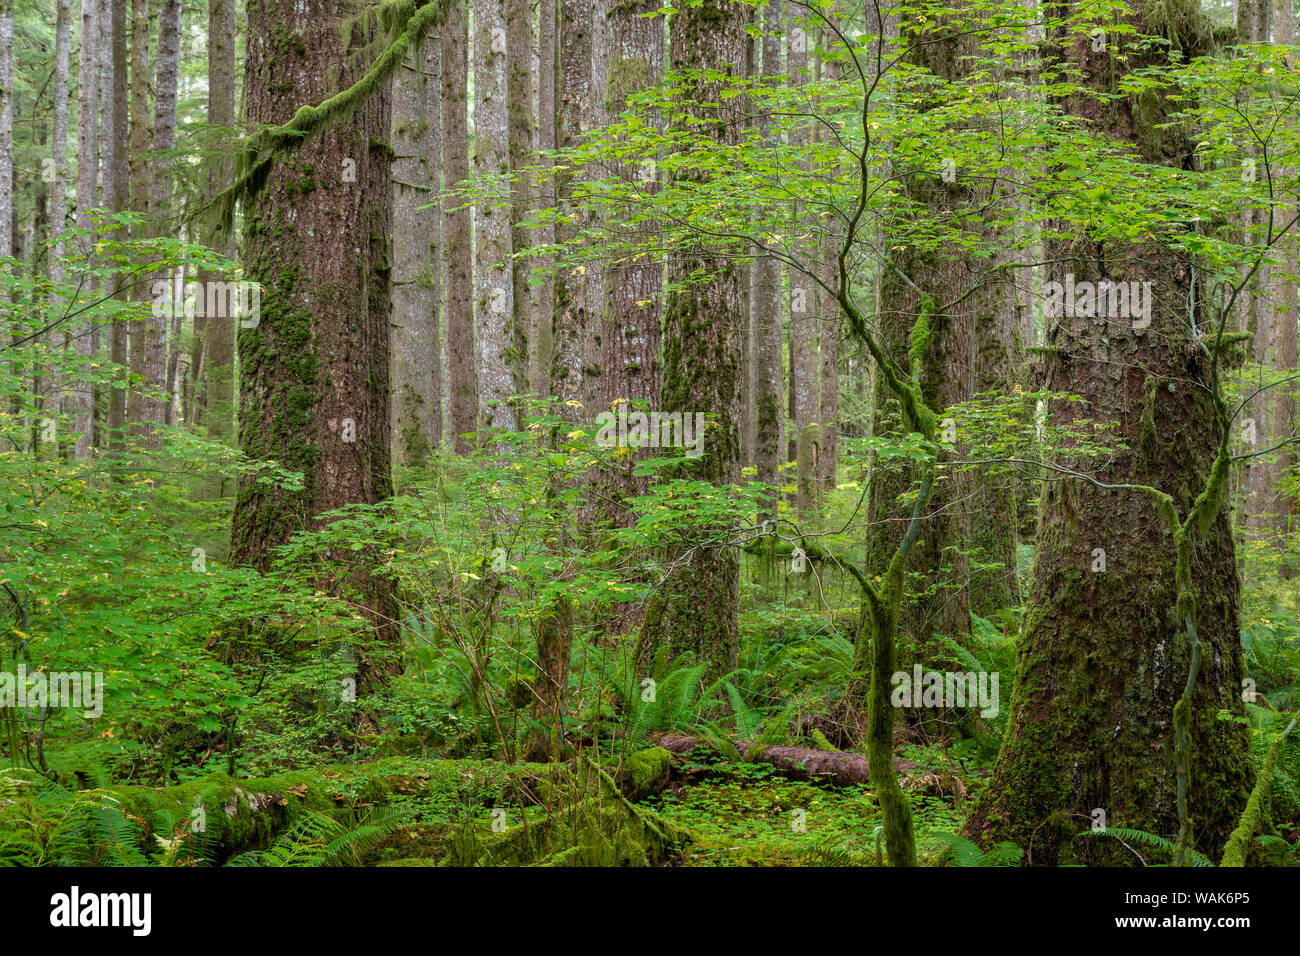 USA, Washington State, Olympic National Park. Forest scenic. Credit as: Don Paulson / Jaynes Gallery / DanitaDelimont.com Stock Photo